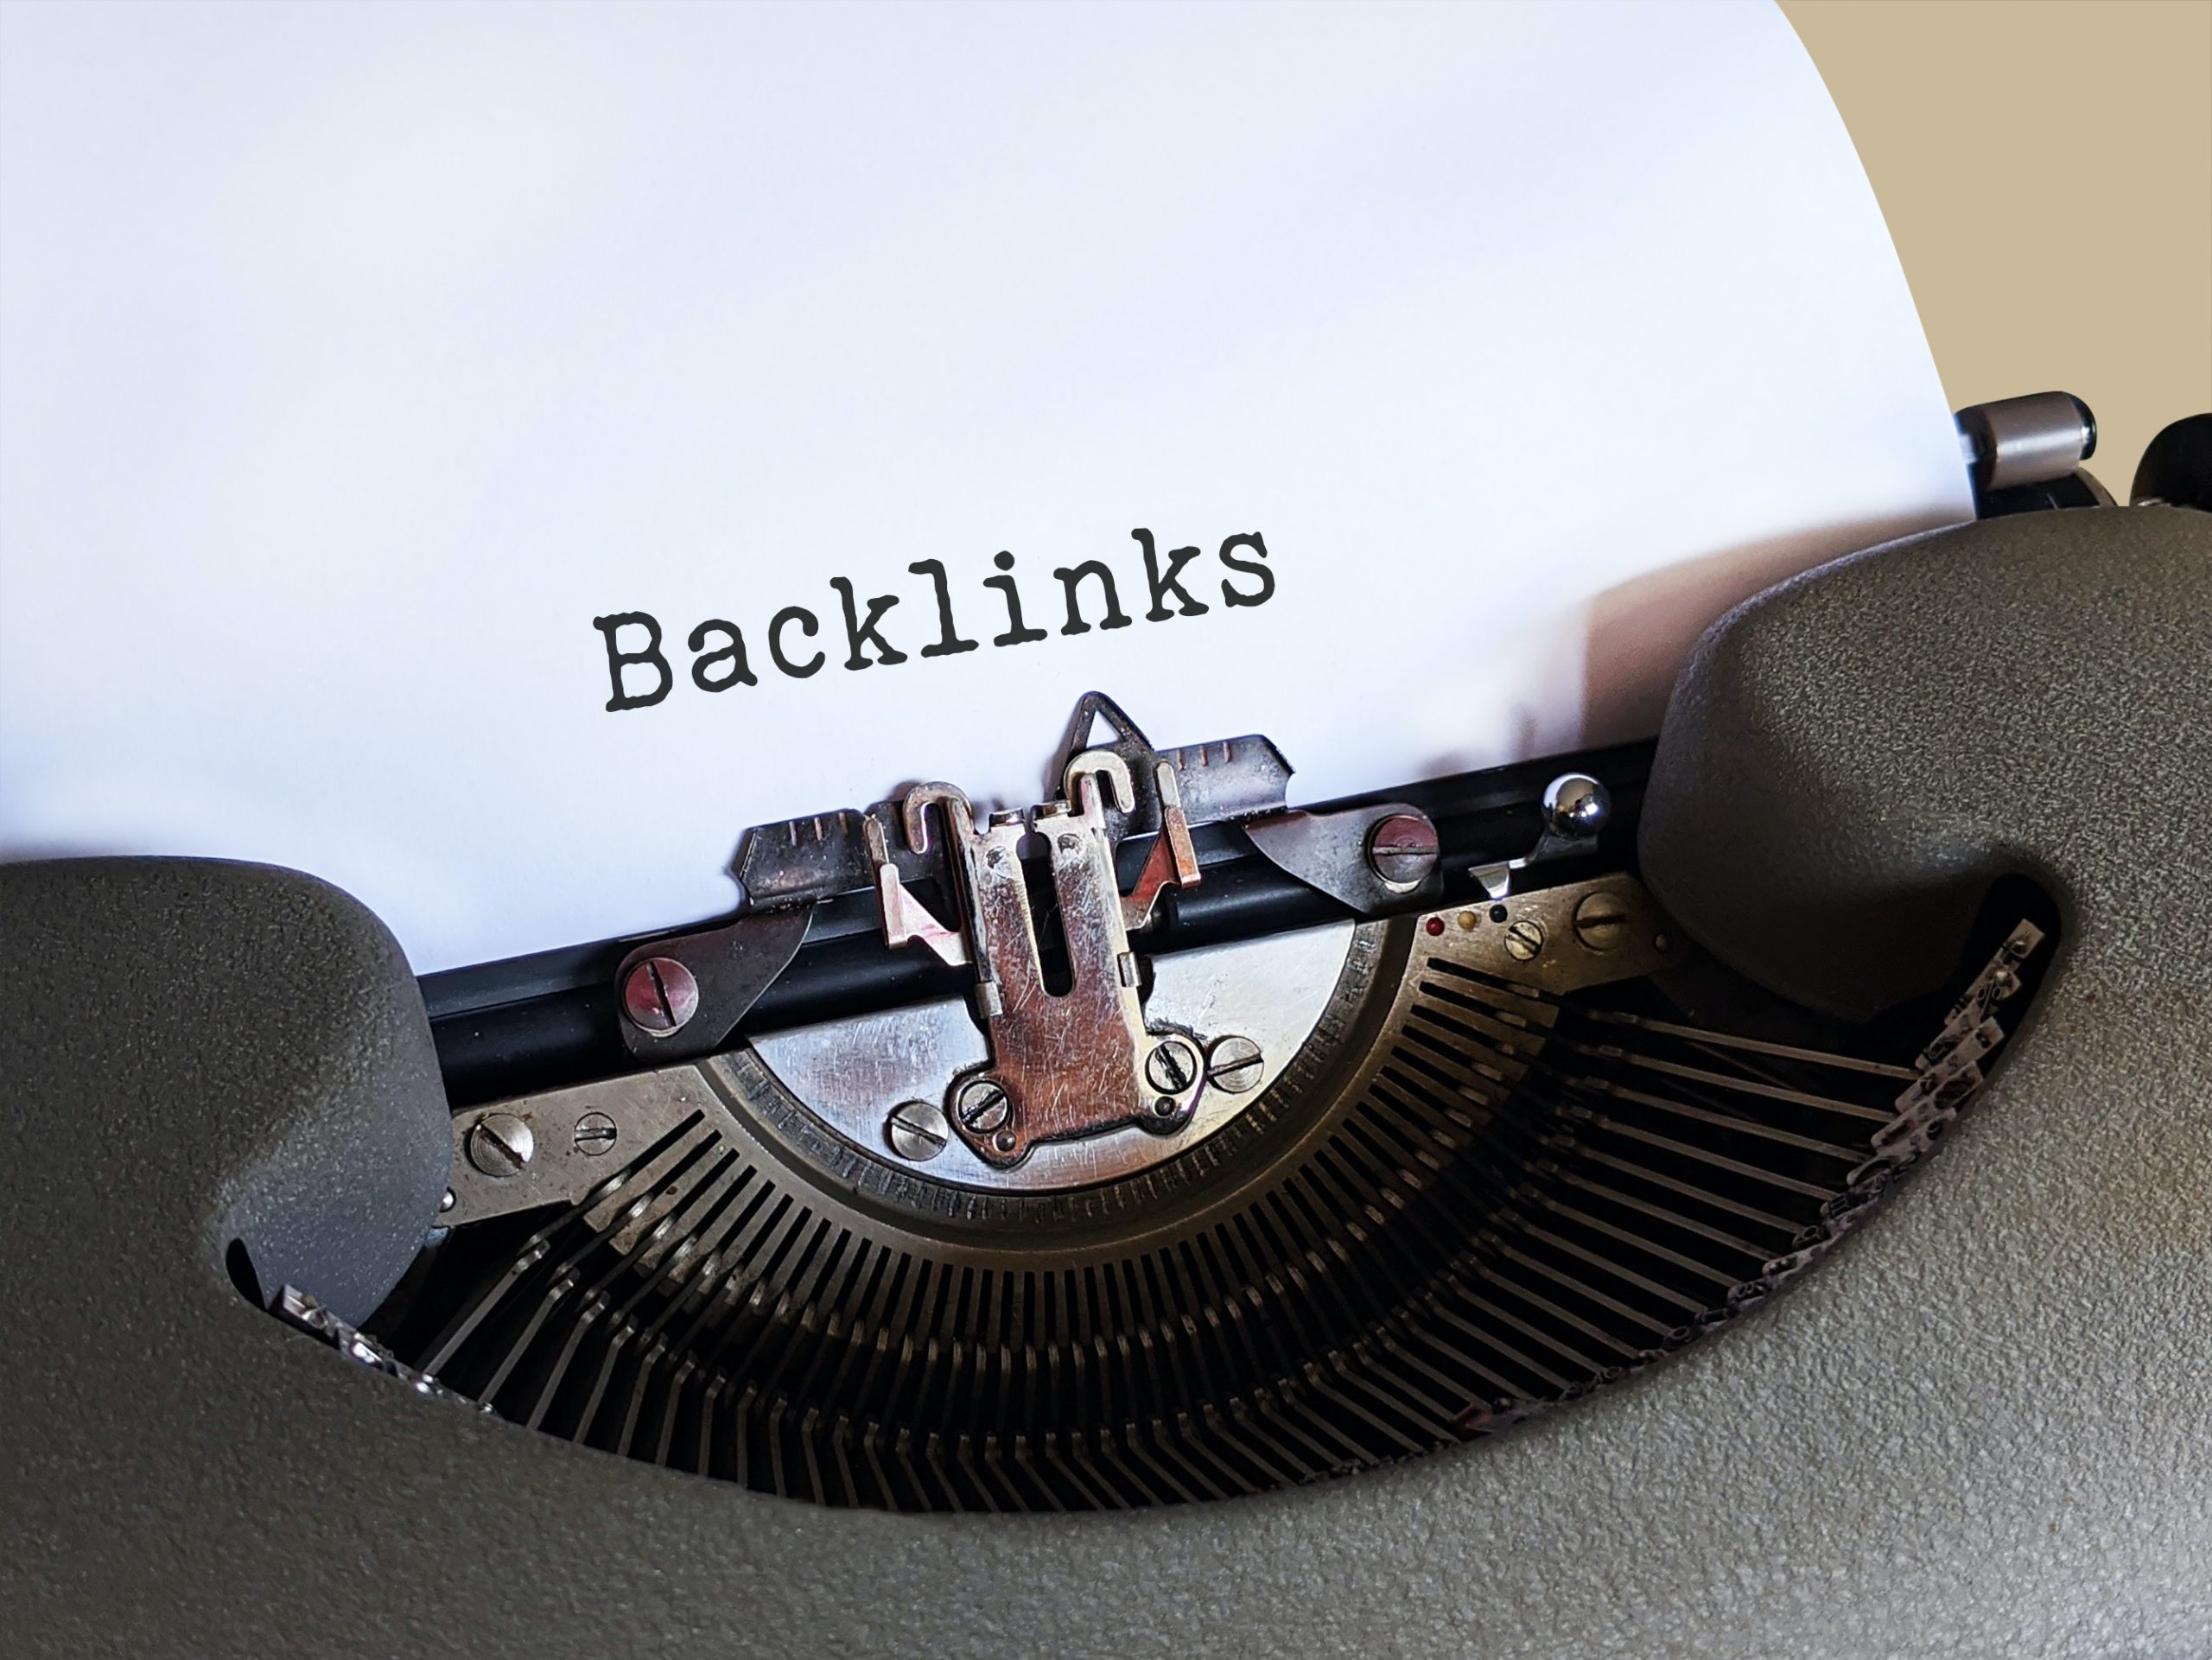 alt="an article about How to get backlinks to your website for free "